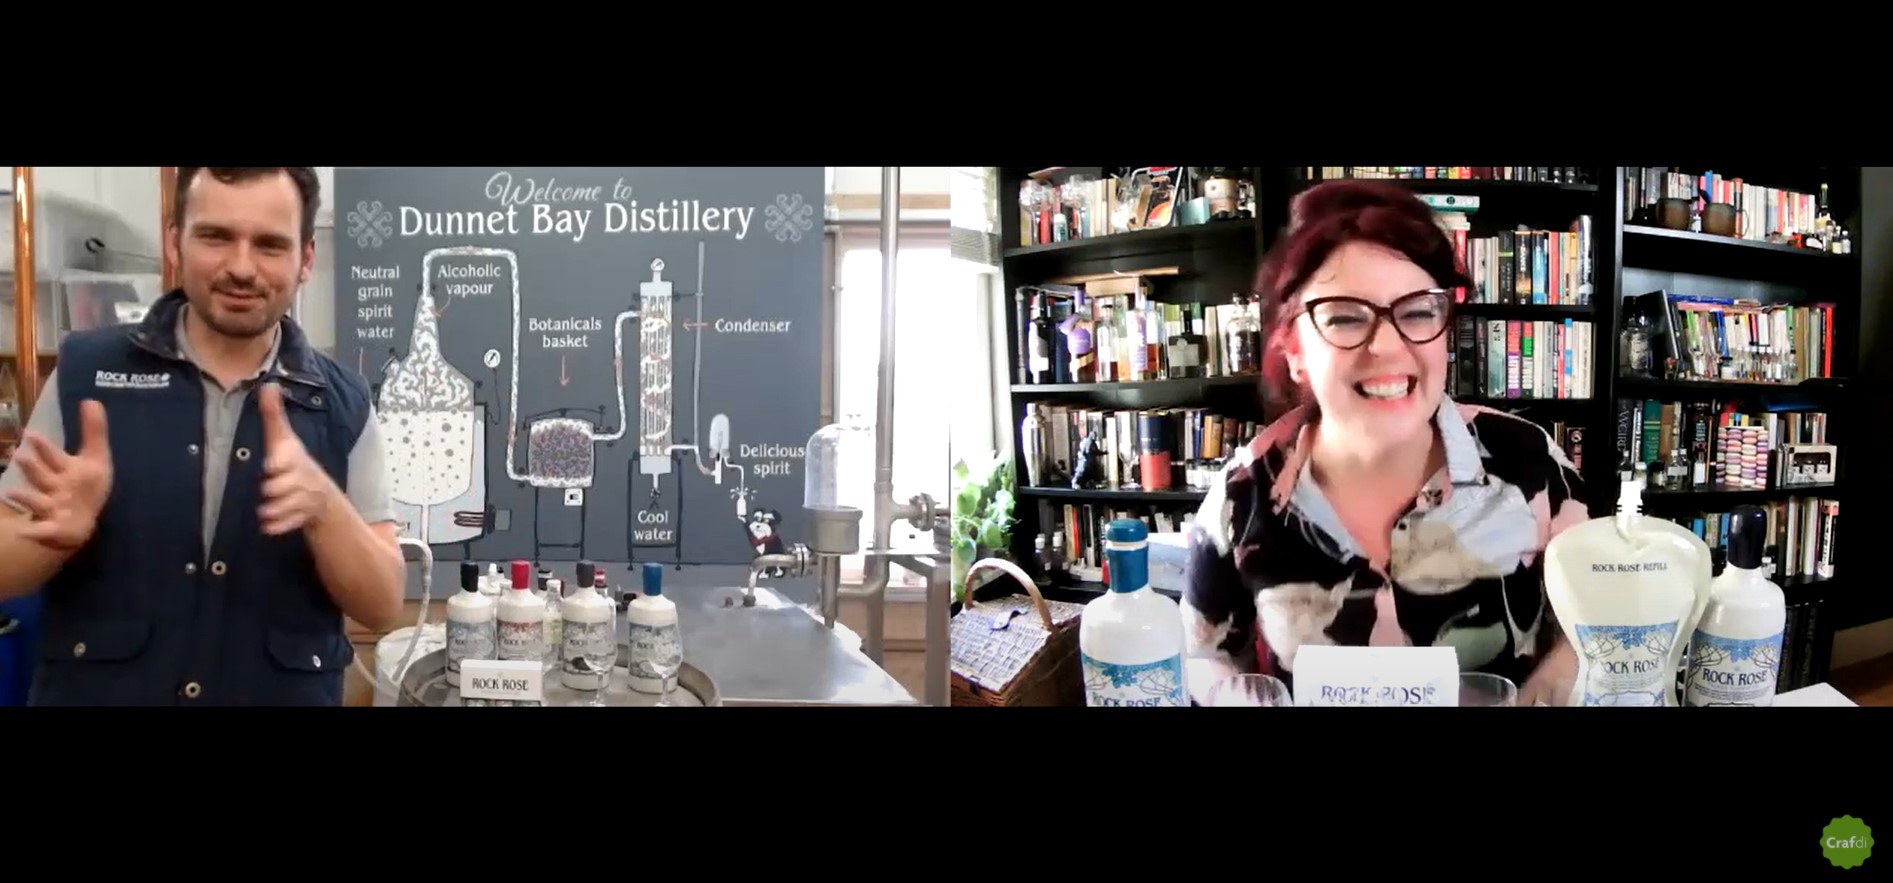 Solid As A Rock – Rock Rose Interview And Tasting For International Scottish Gin Day